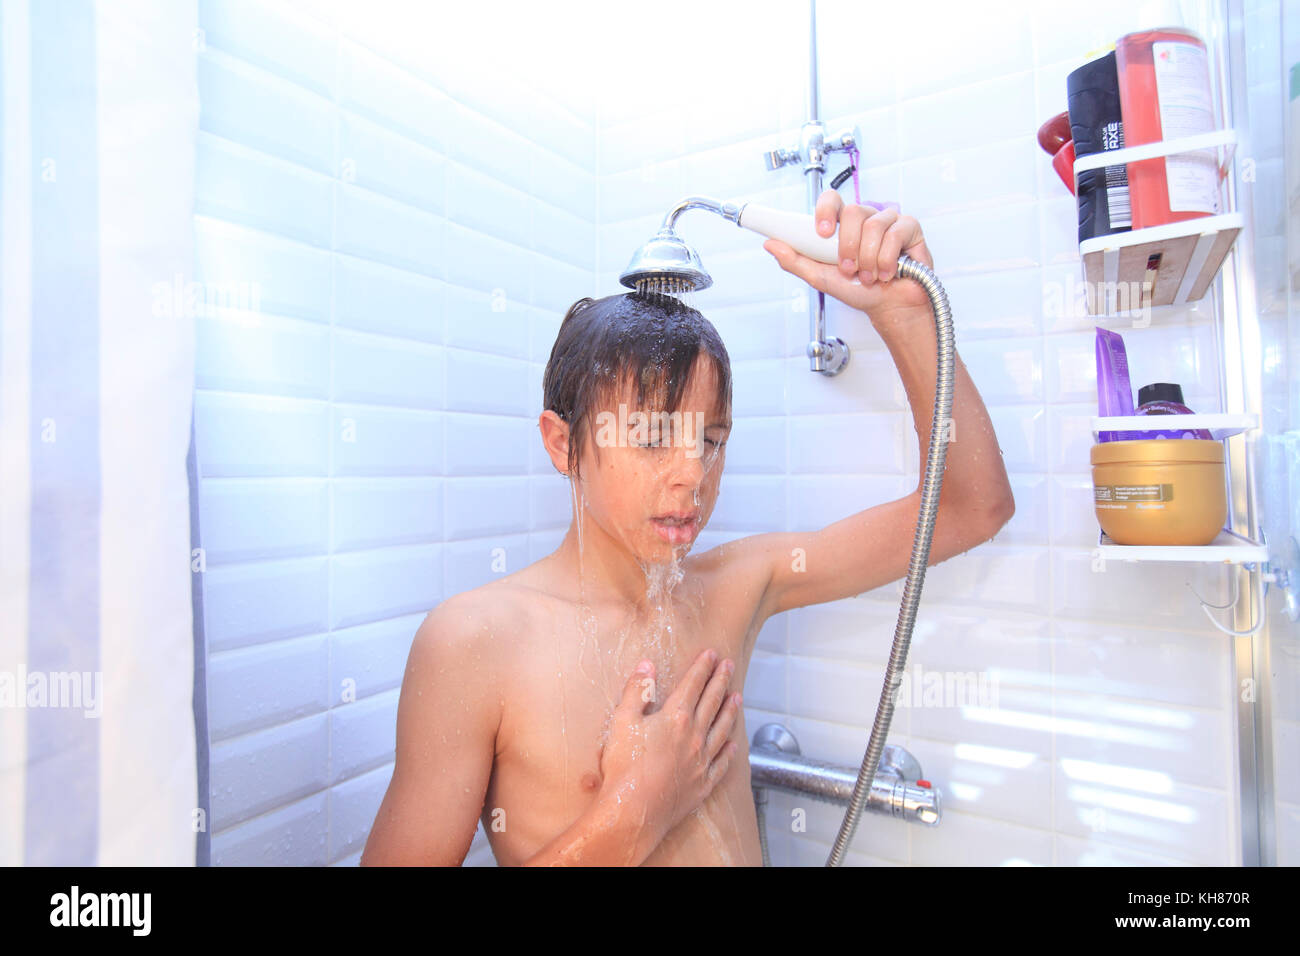 France Young Boy In The Bathroom Taking Shower Stoc